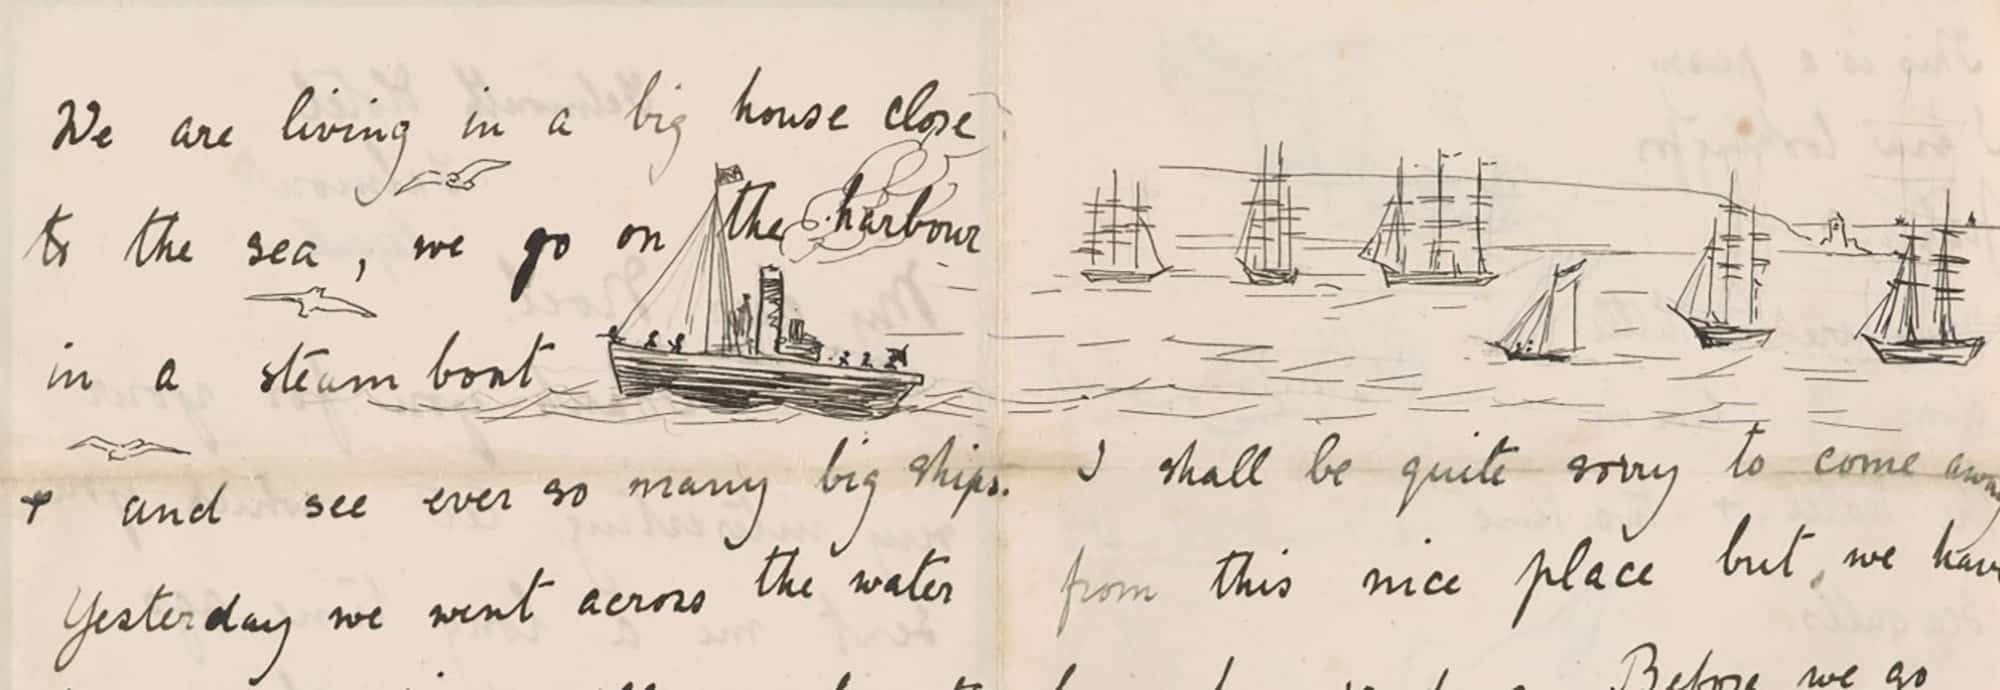 A letter written with black ink on off-white paper. Small drawings of ships are featured on the right-hand side.